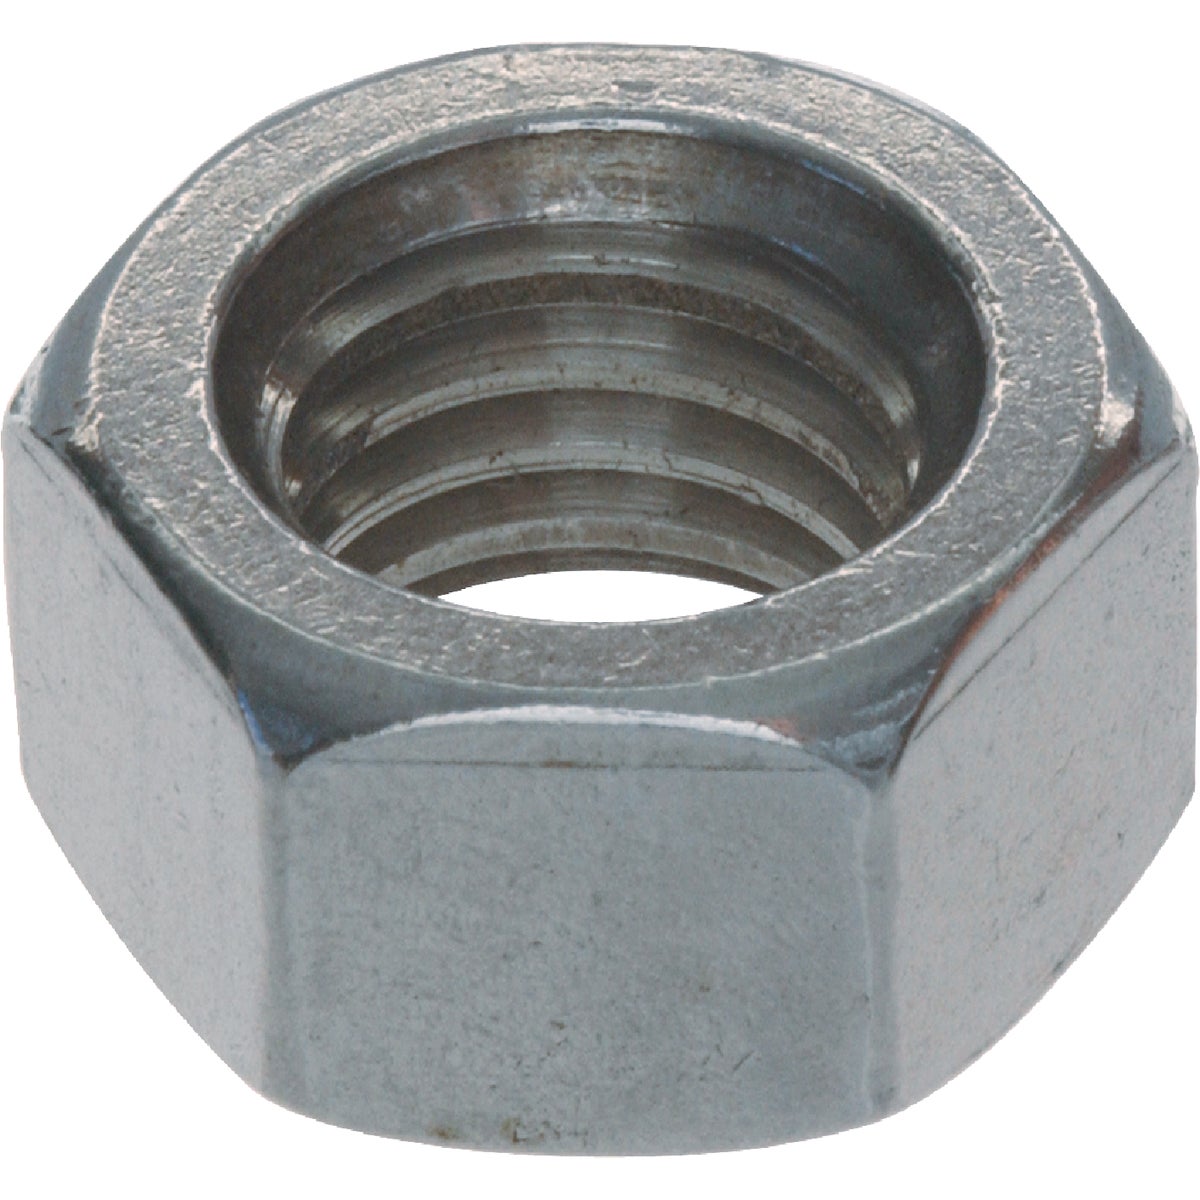 Hillman 1/4 In. 20 tpi Grade 2 Stainless Steel Hex Nuts (100 Ct.)